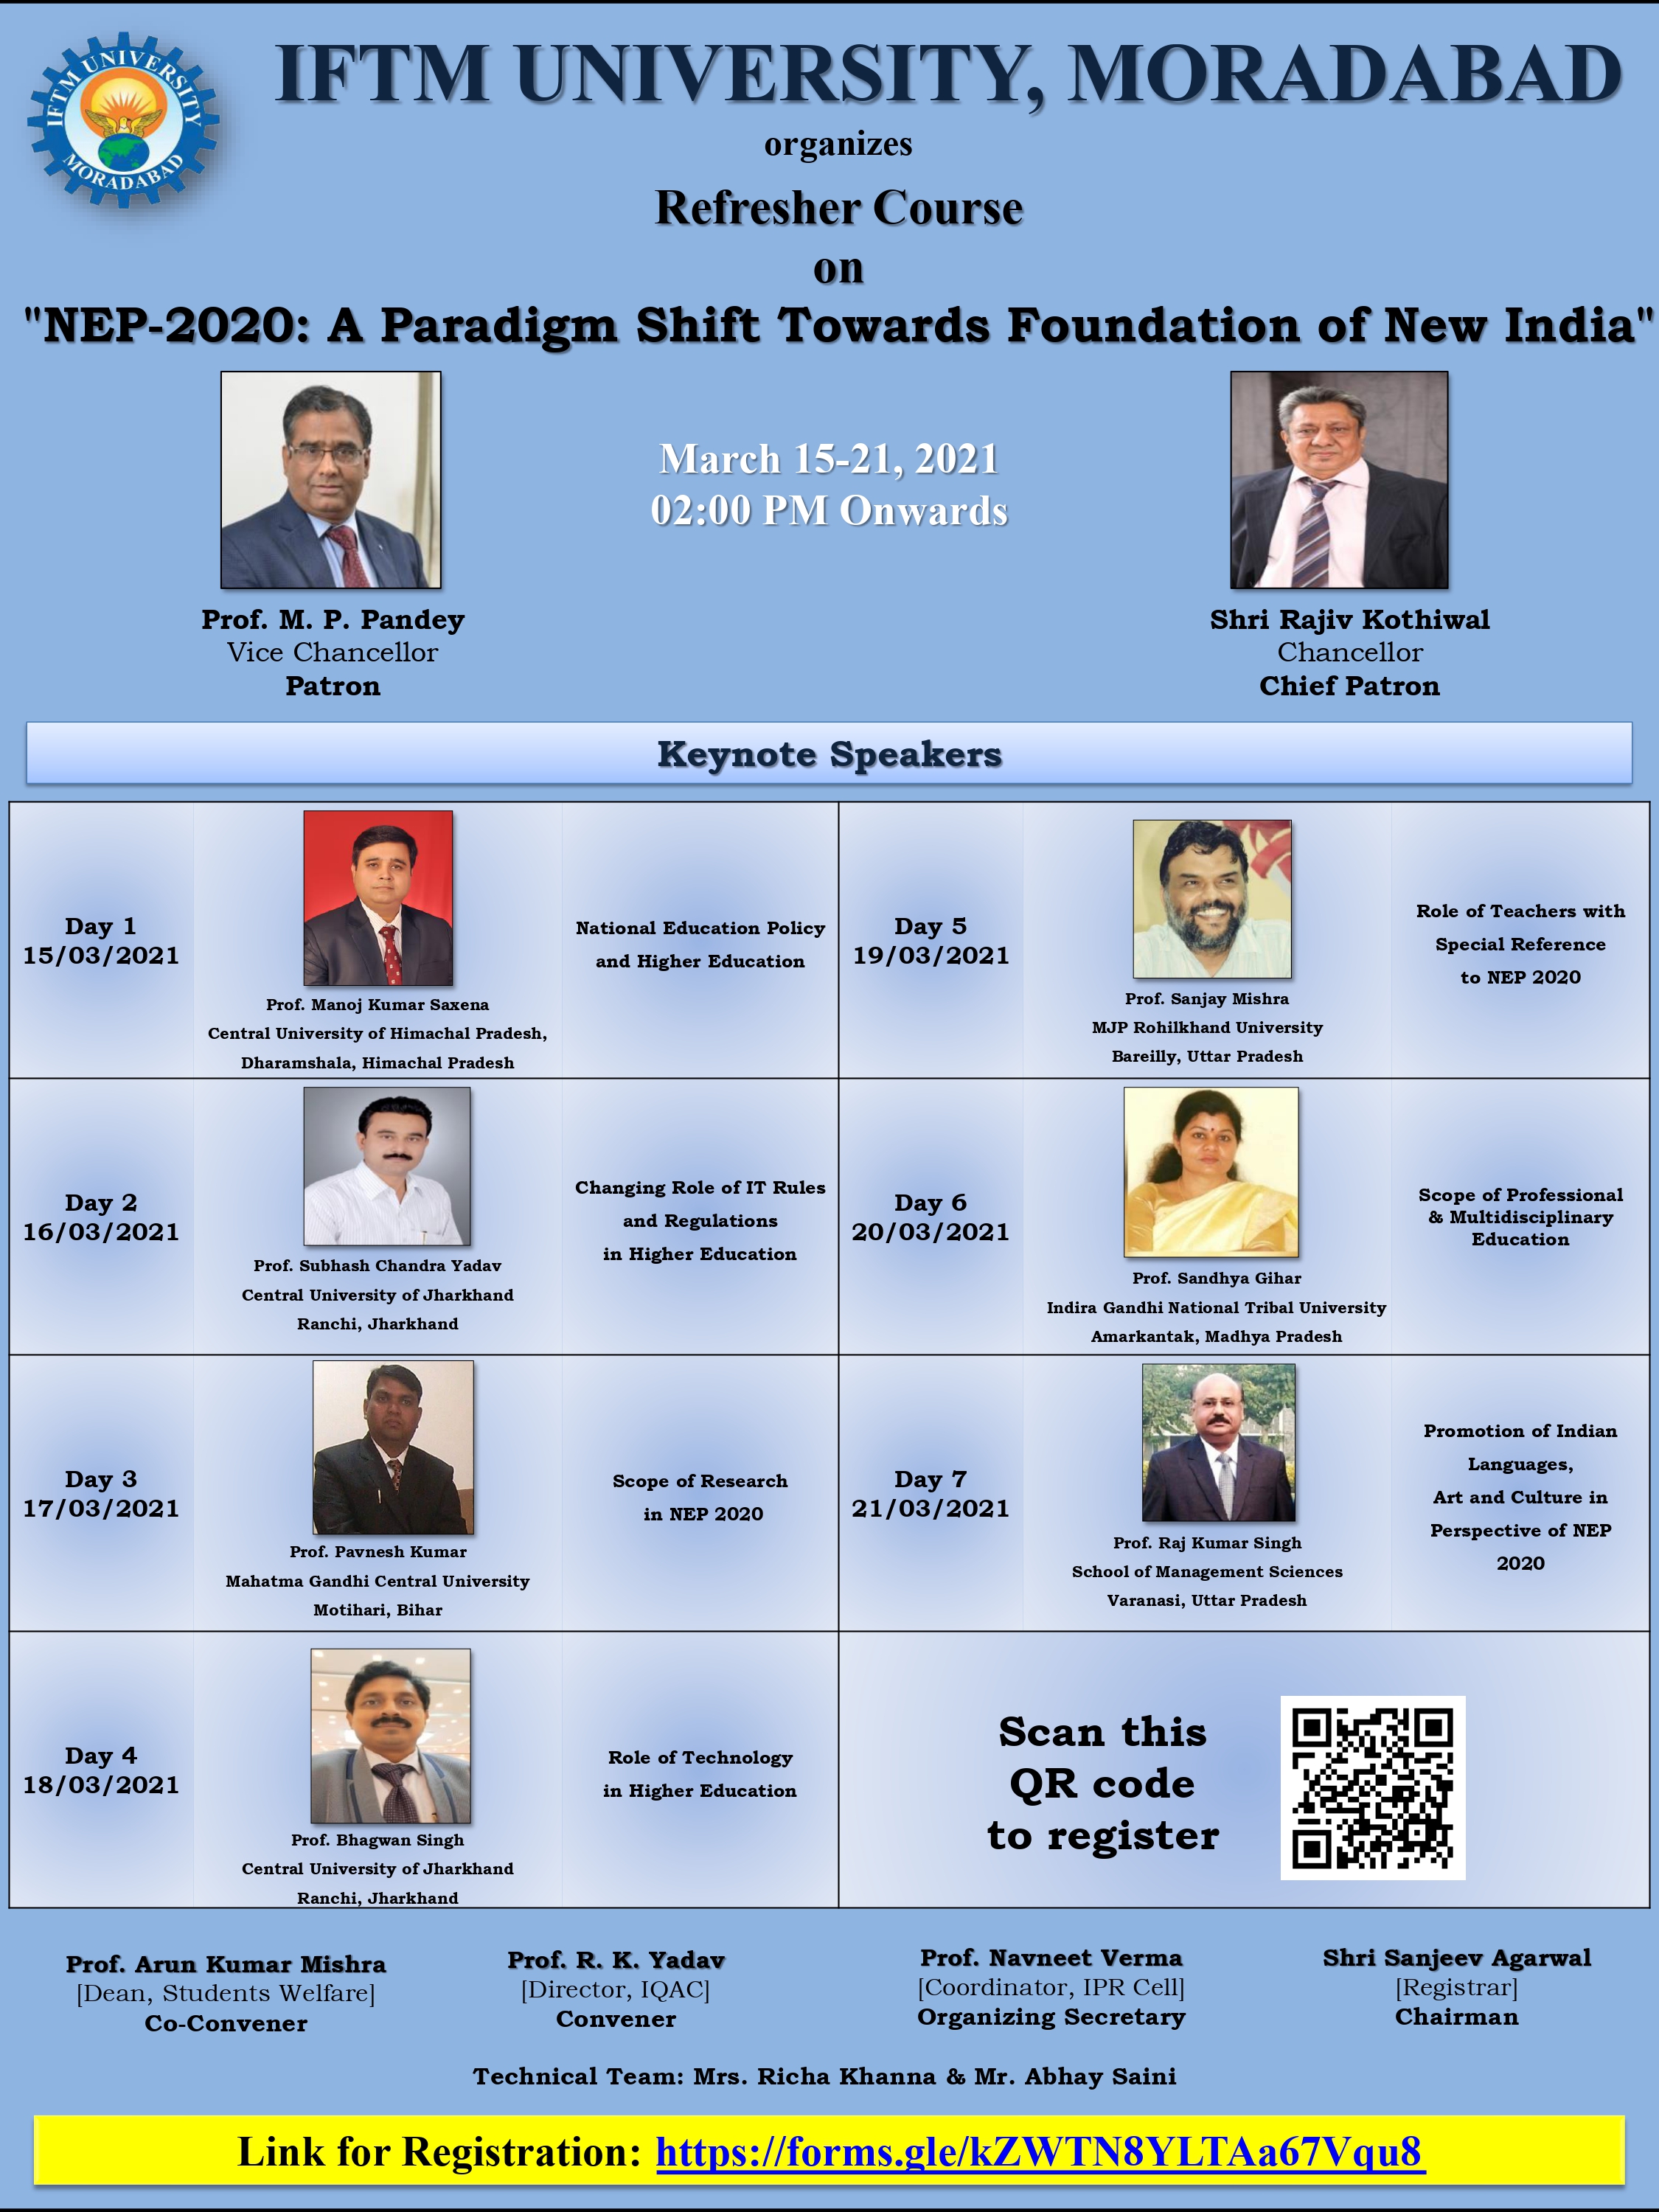 Refresher Course on NEP-2020: A Paradigm Shift Towards Foundation of New India.